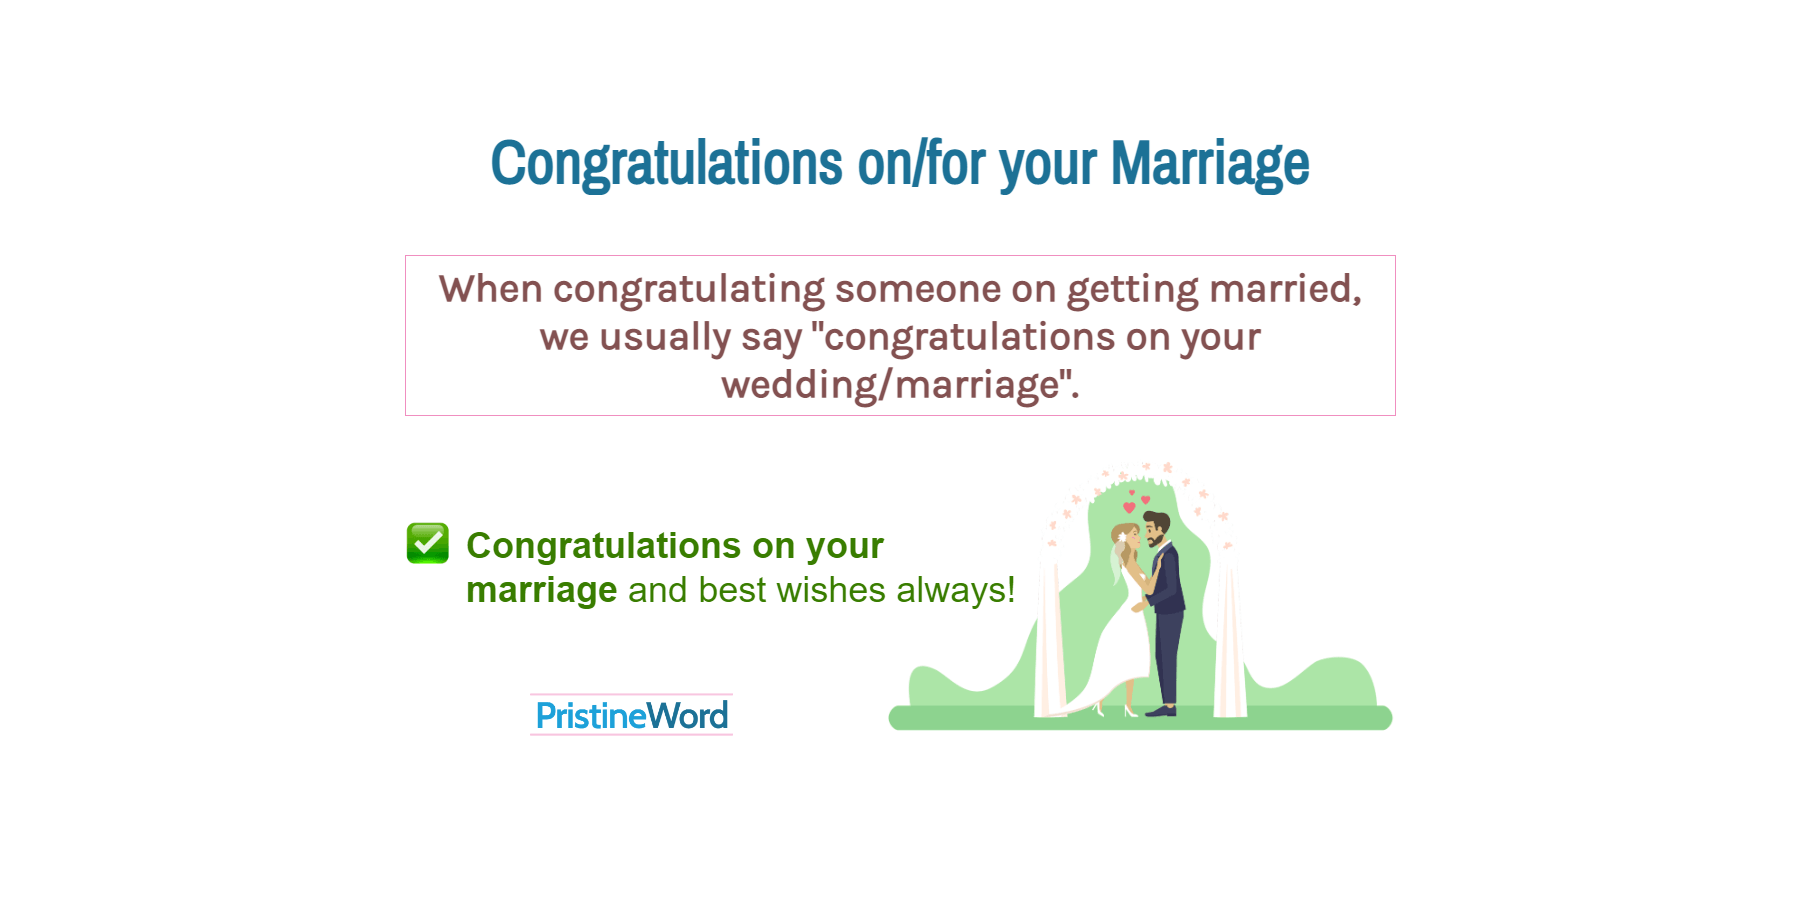 Congratulations on/for Your Wedding (Prepositions)